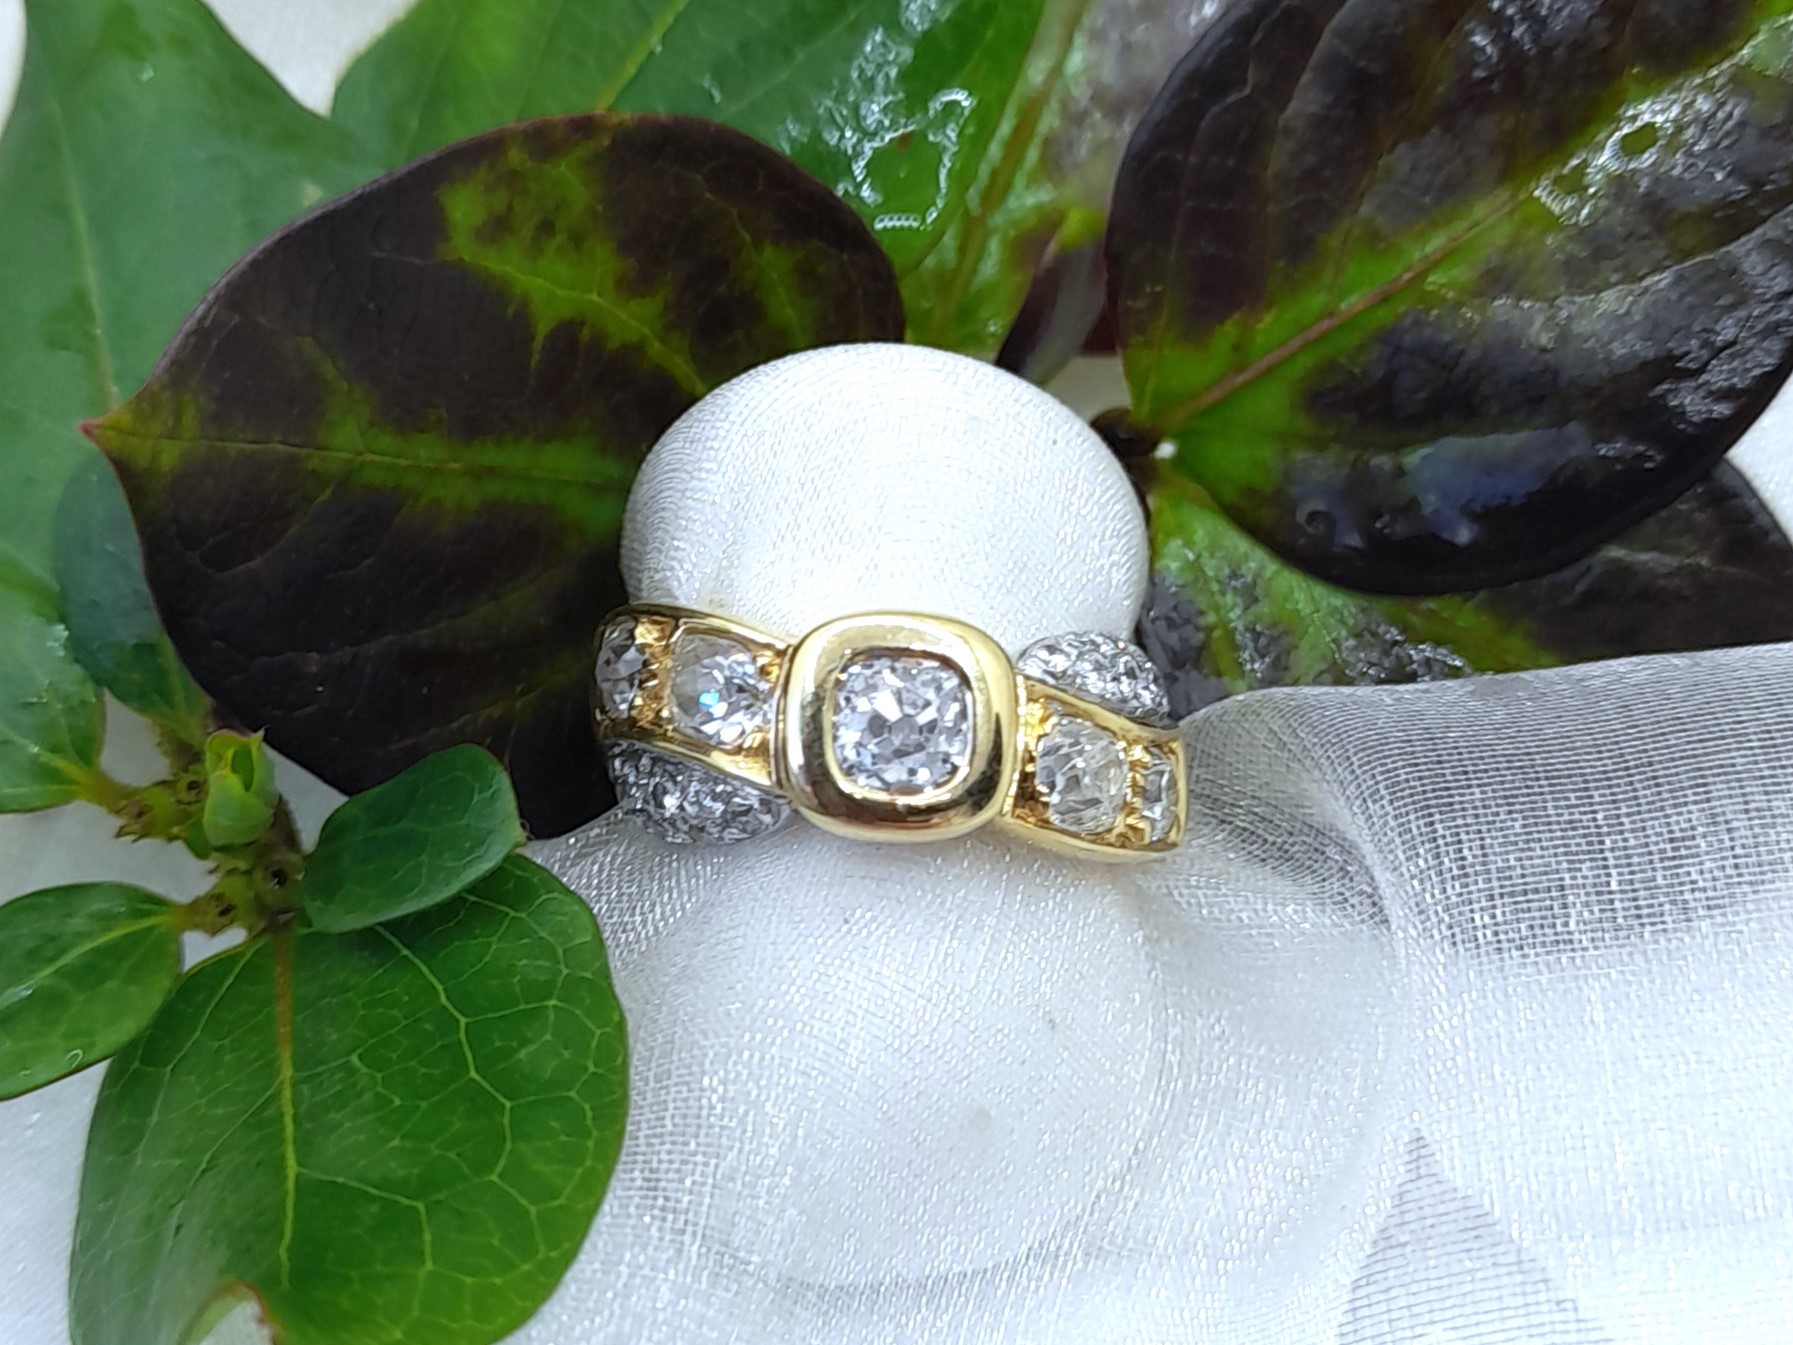 Classic Bespoke Diamond Ring set with Old Cut Diamonds from a Sentimental family ring designed in a twist style by Pearl Perfect Design Room